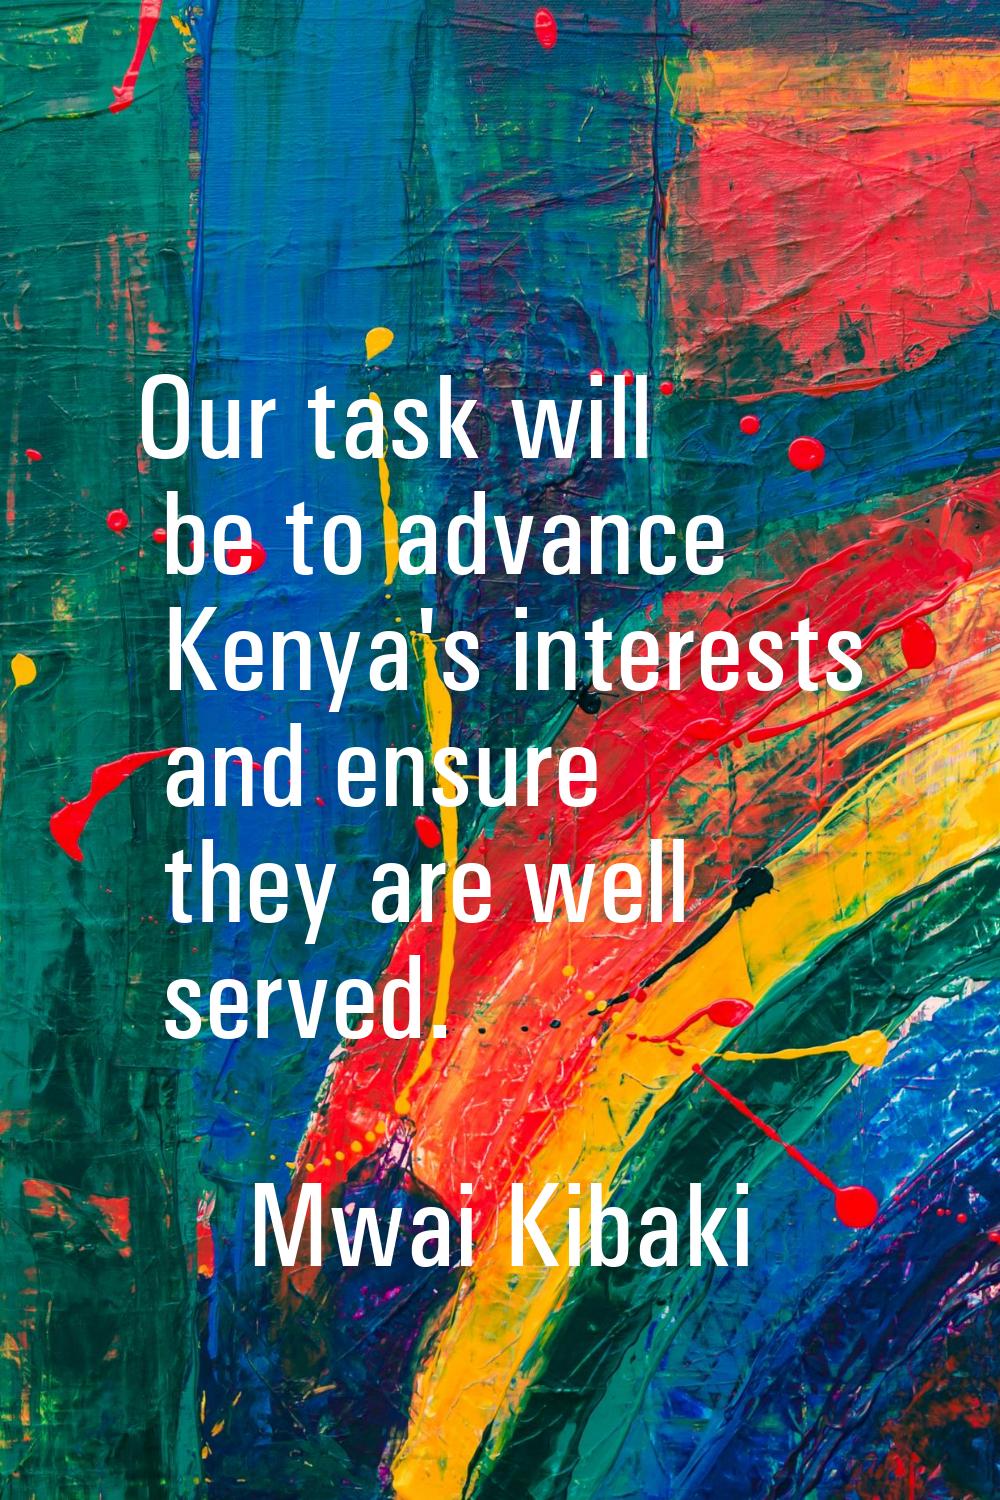 Our task will be to advance Kenya's interests and ensure they are well served.